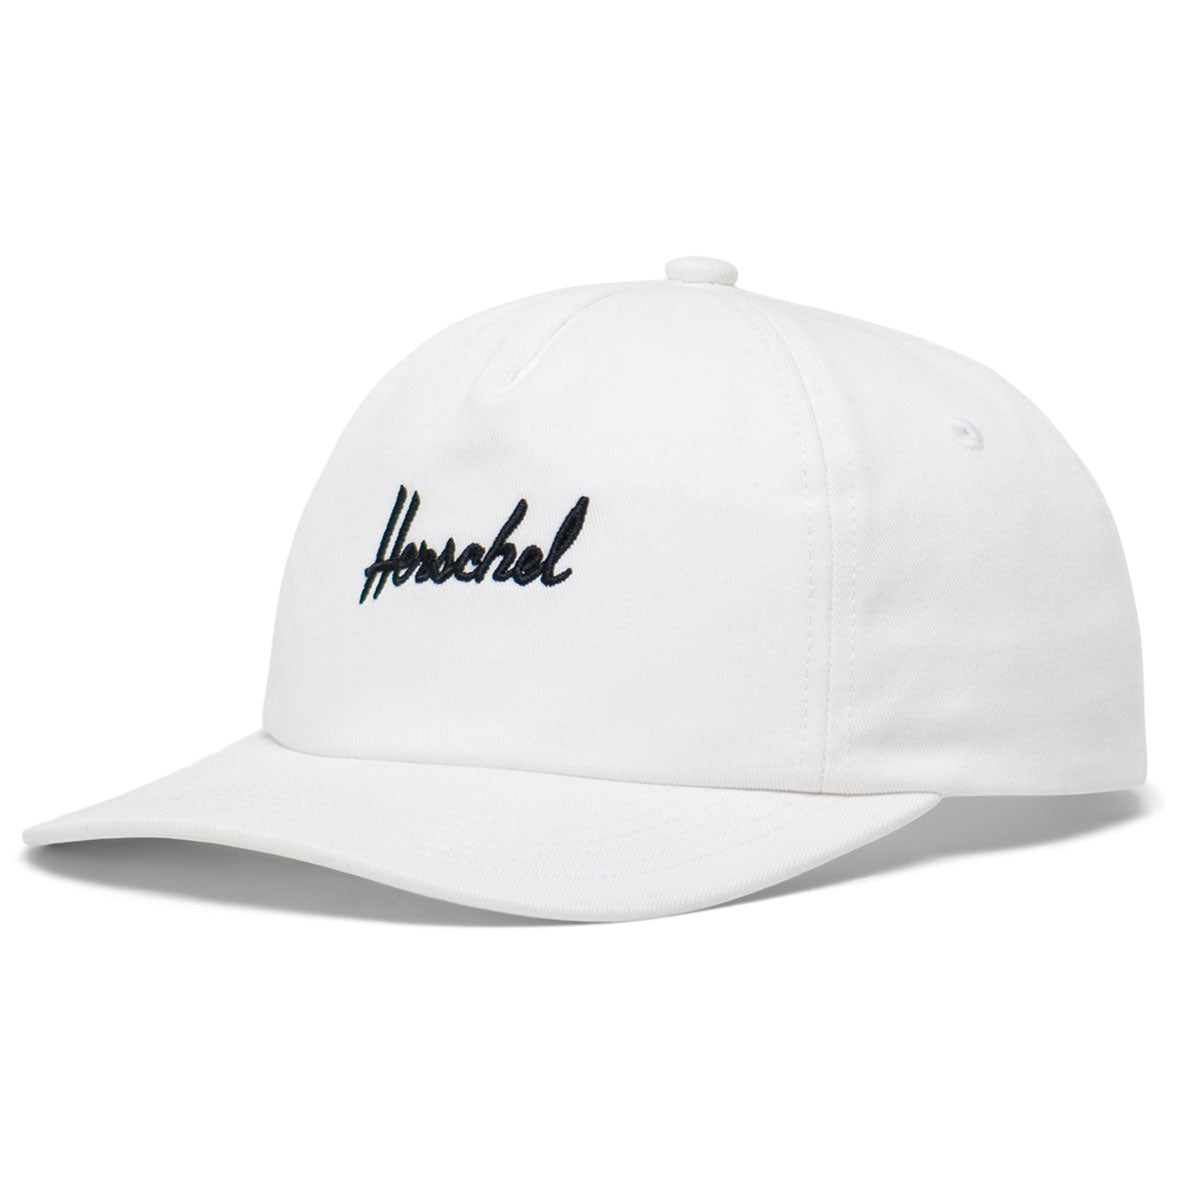 Herschel Supply Scout Embroidery Hat - White image 1